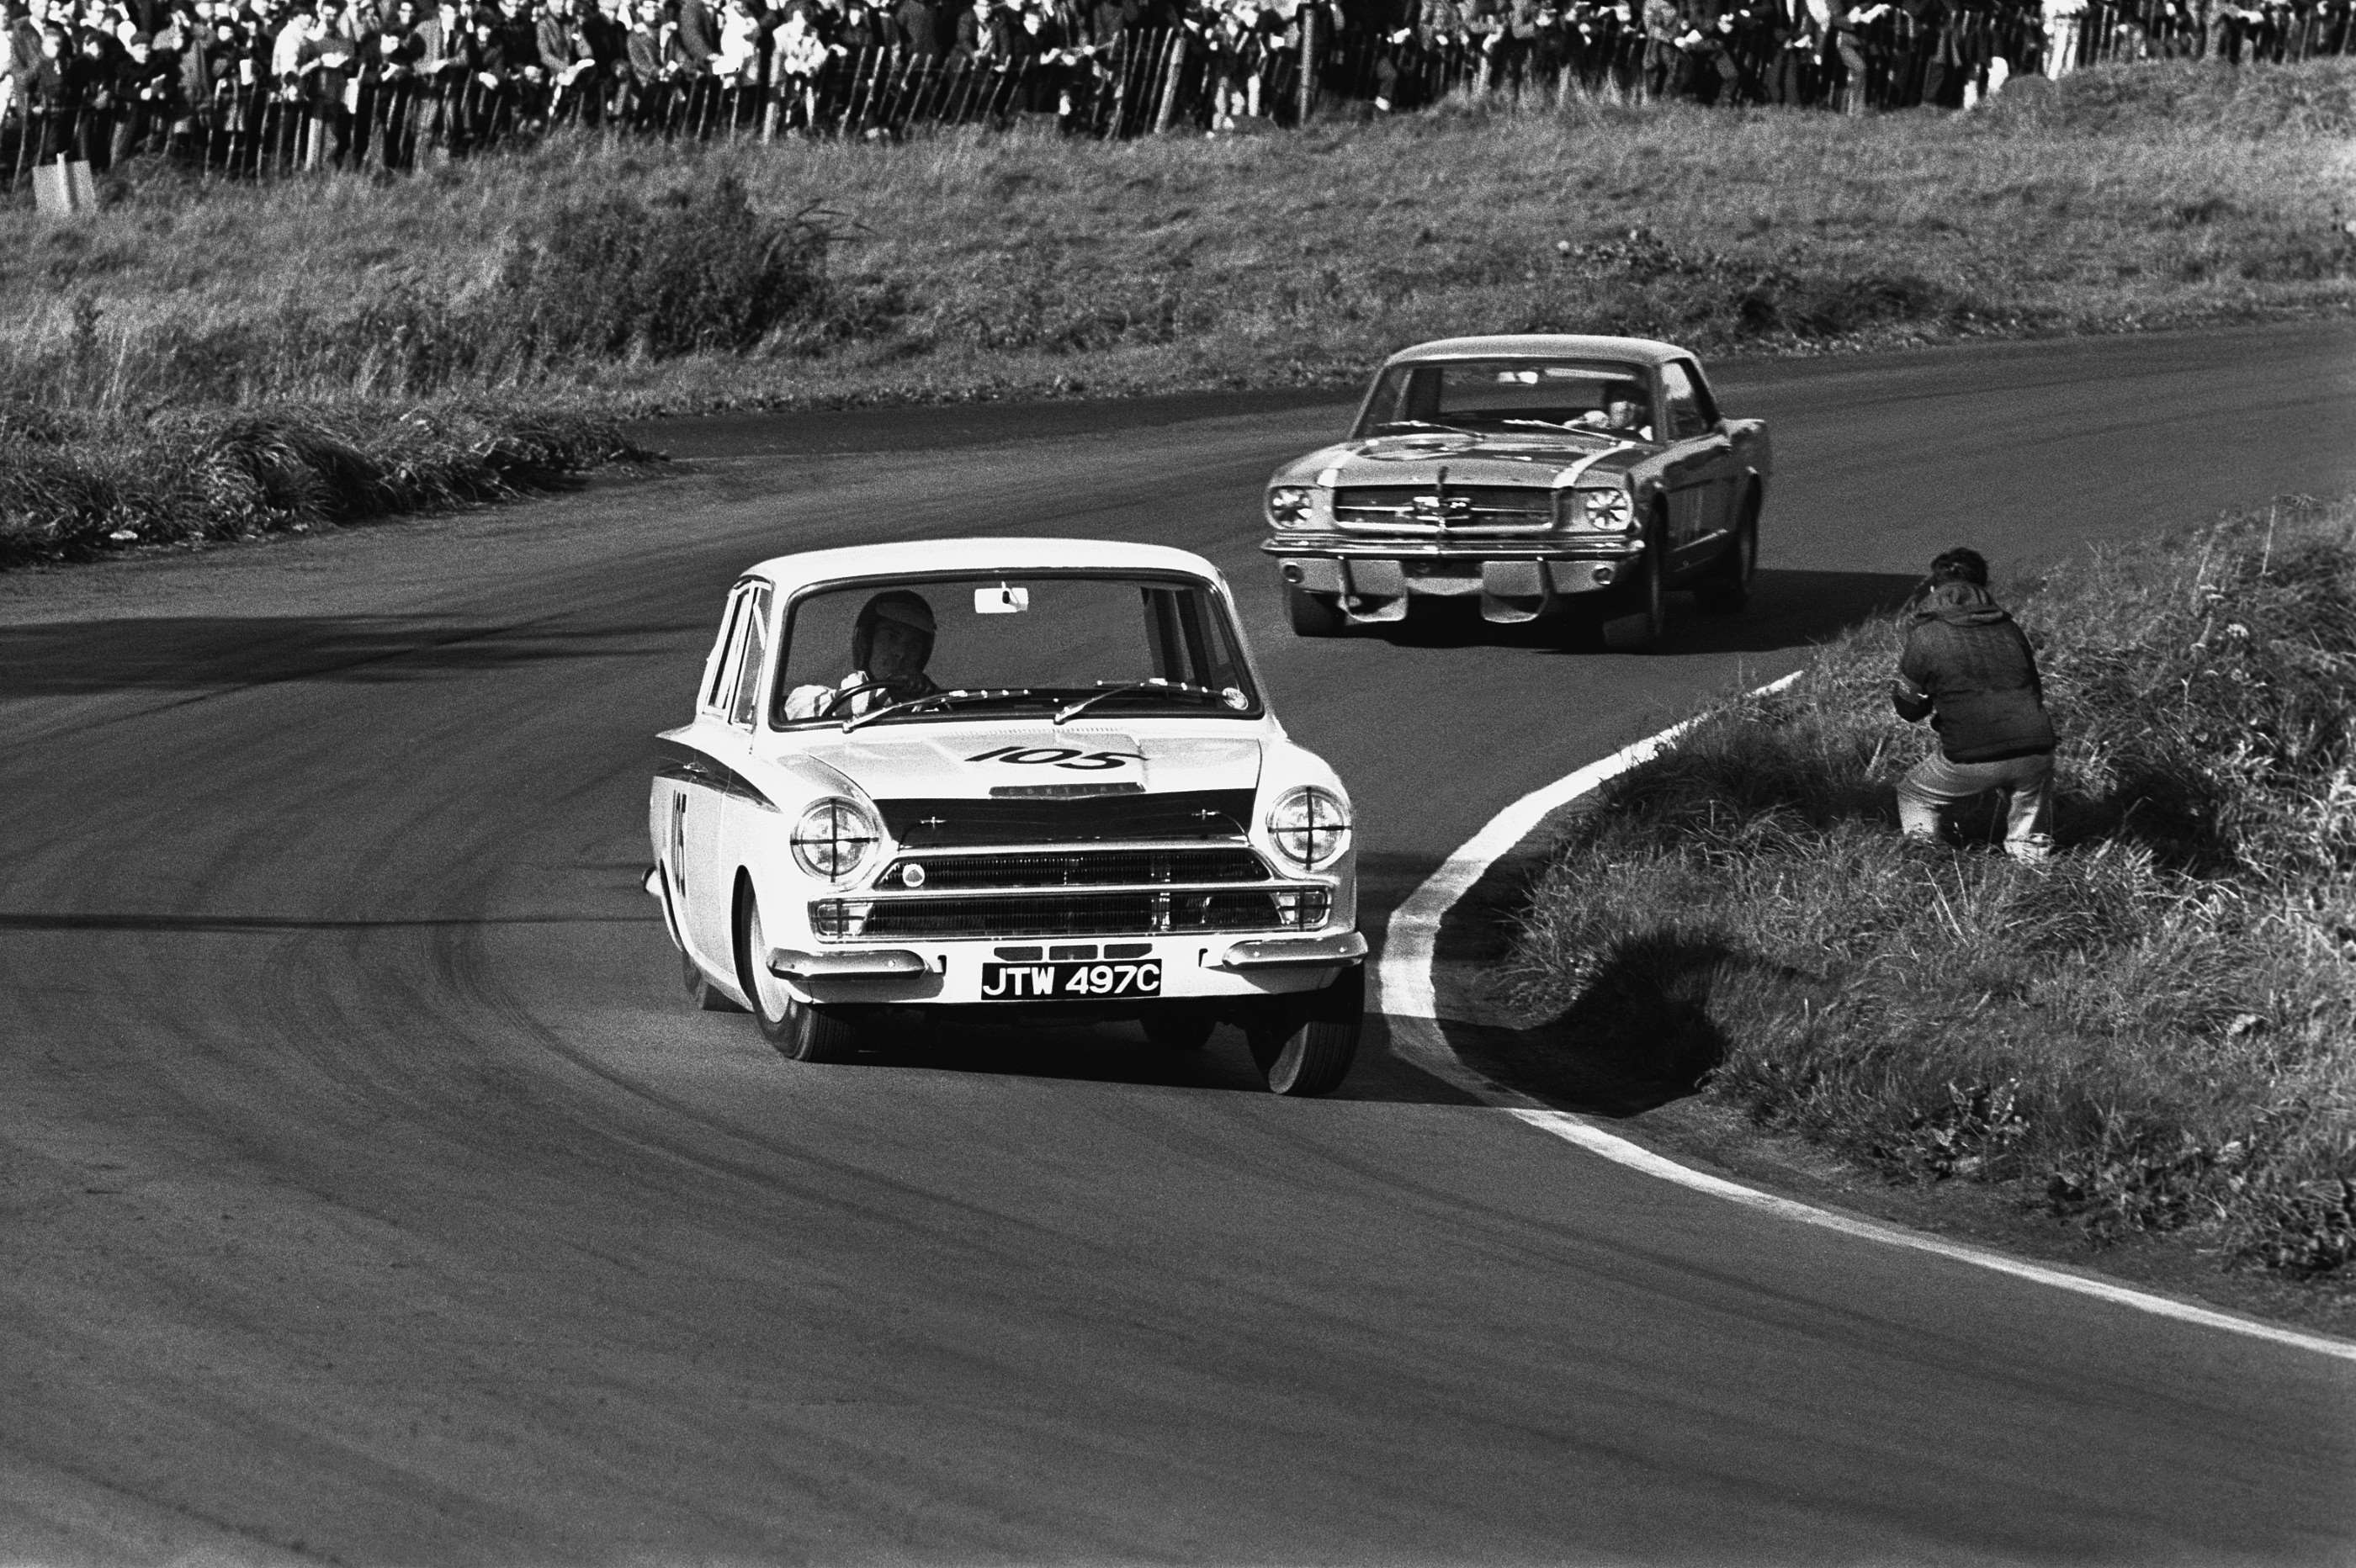 The plucky Cortina (Clark) leads Brabham's Mustang at Oulton, 1965